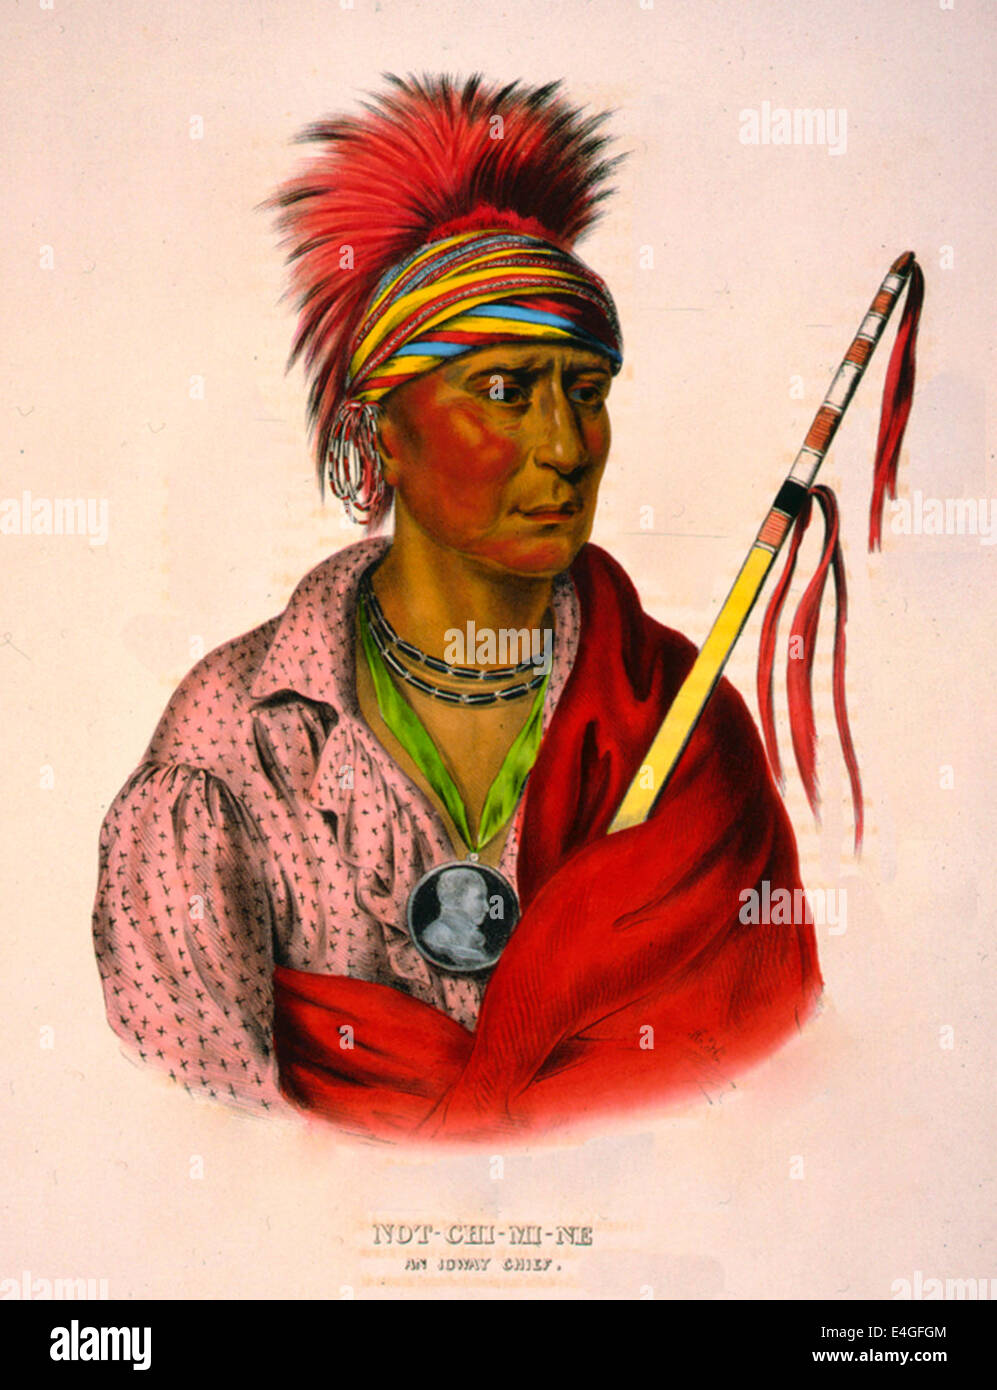 Not-Chi-Mi-Ne an Ioway chief -  Not-Chi-Mi-Ne, head-and-shoulders portrait, facing right, wearing earrings and a portrait medallion around his neck. Stock Photo